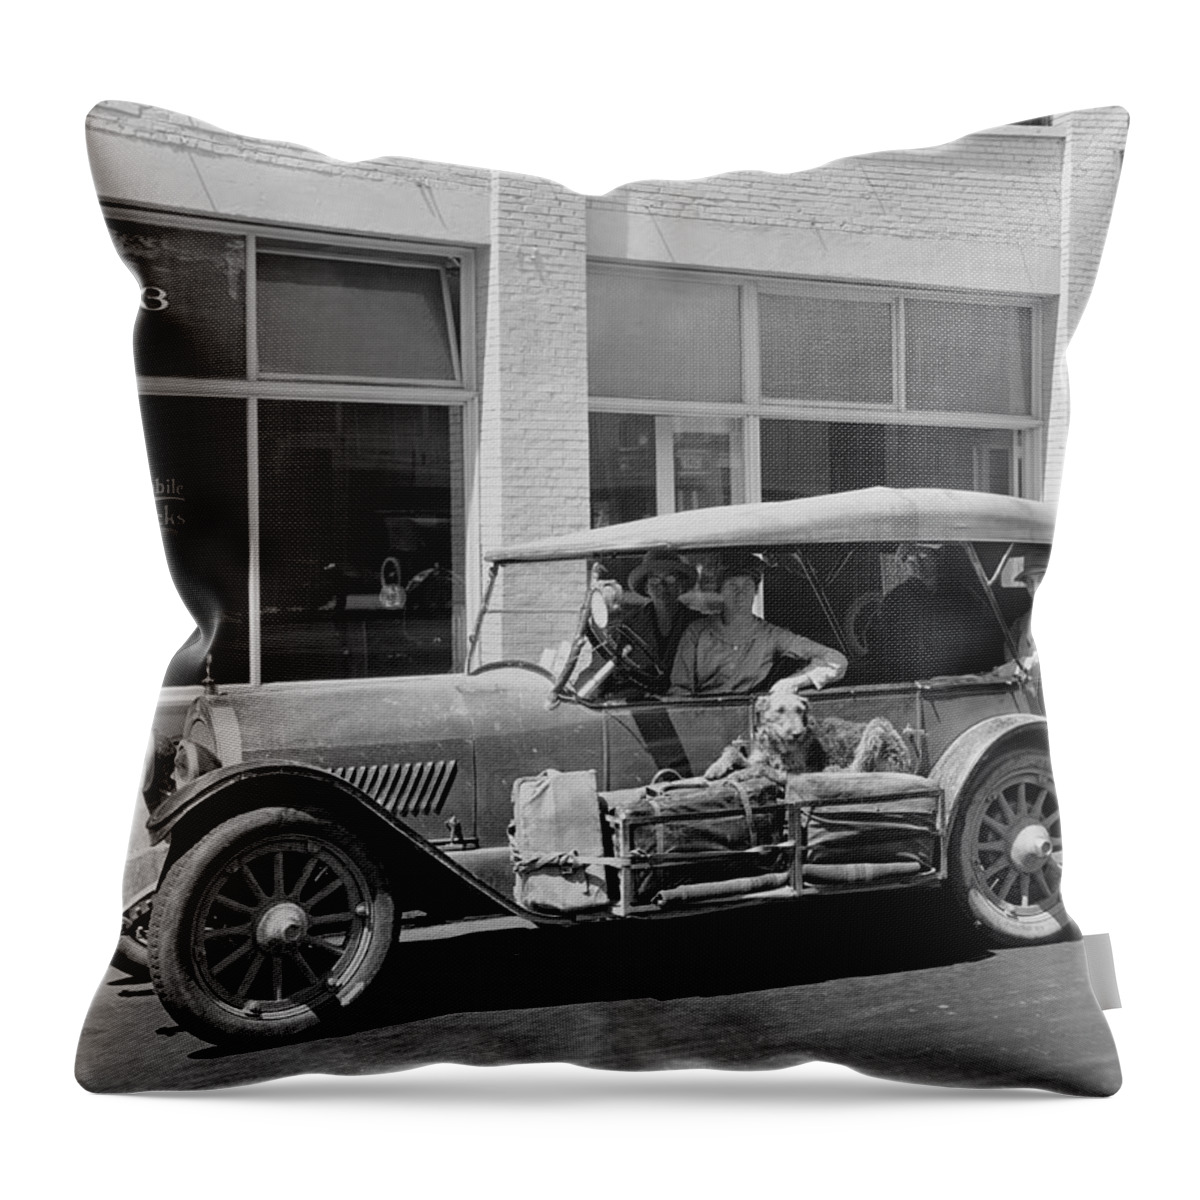 1910s Throw Pillow featuring the photograph Women Traveling In A 1919 Car by Underwood Archives